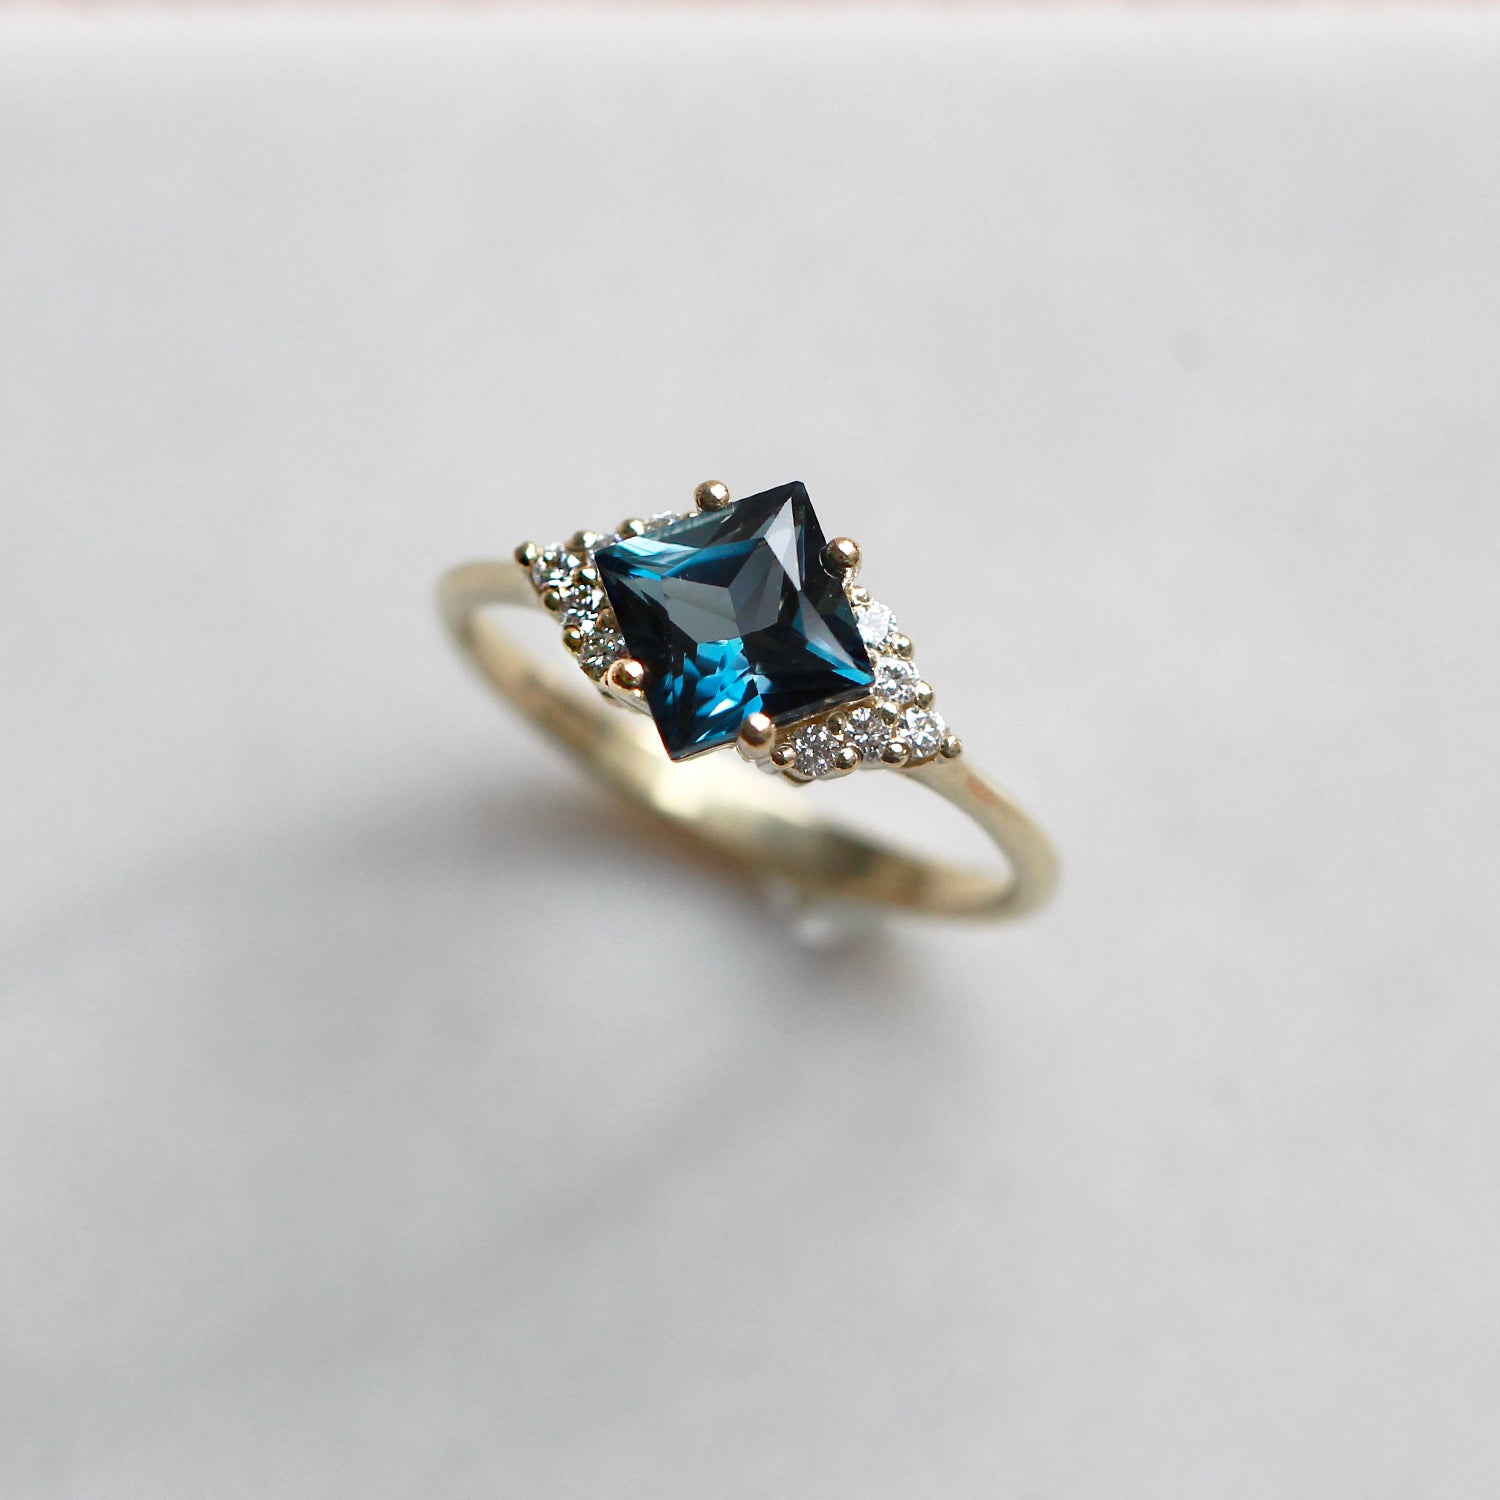 Juliette Ring With Diamonds and Blue Topaz